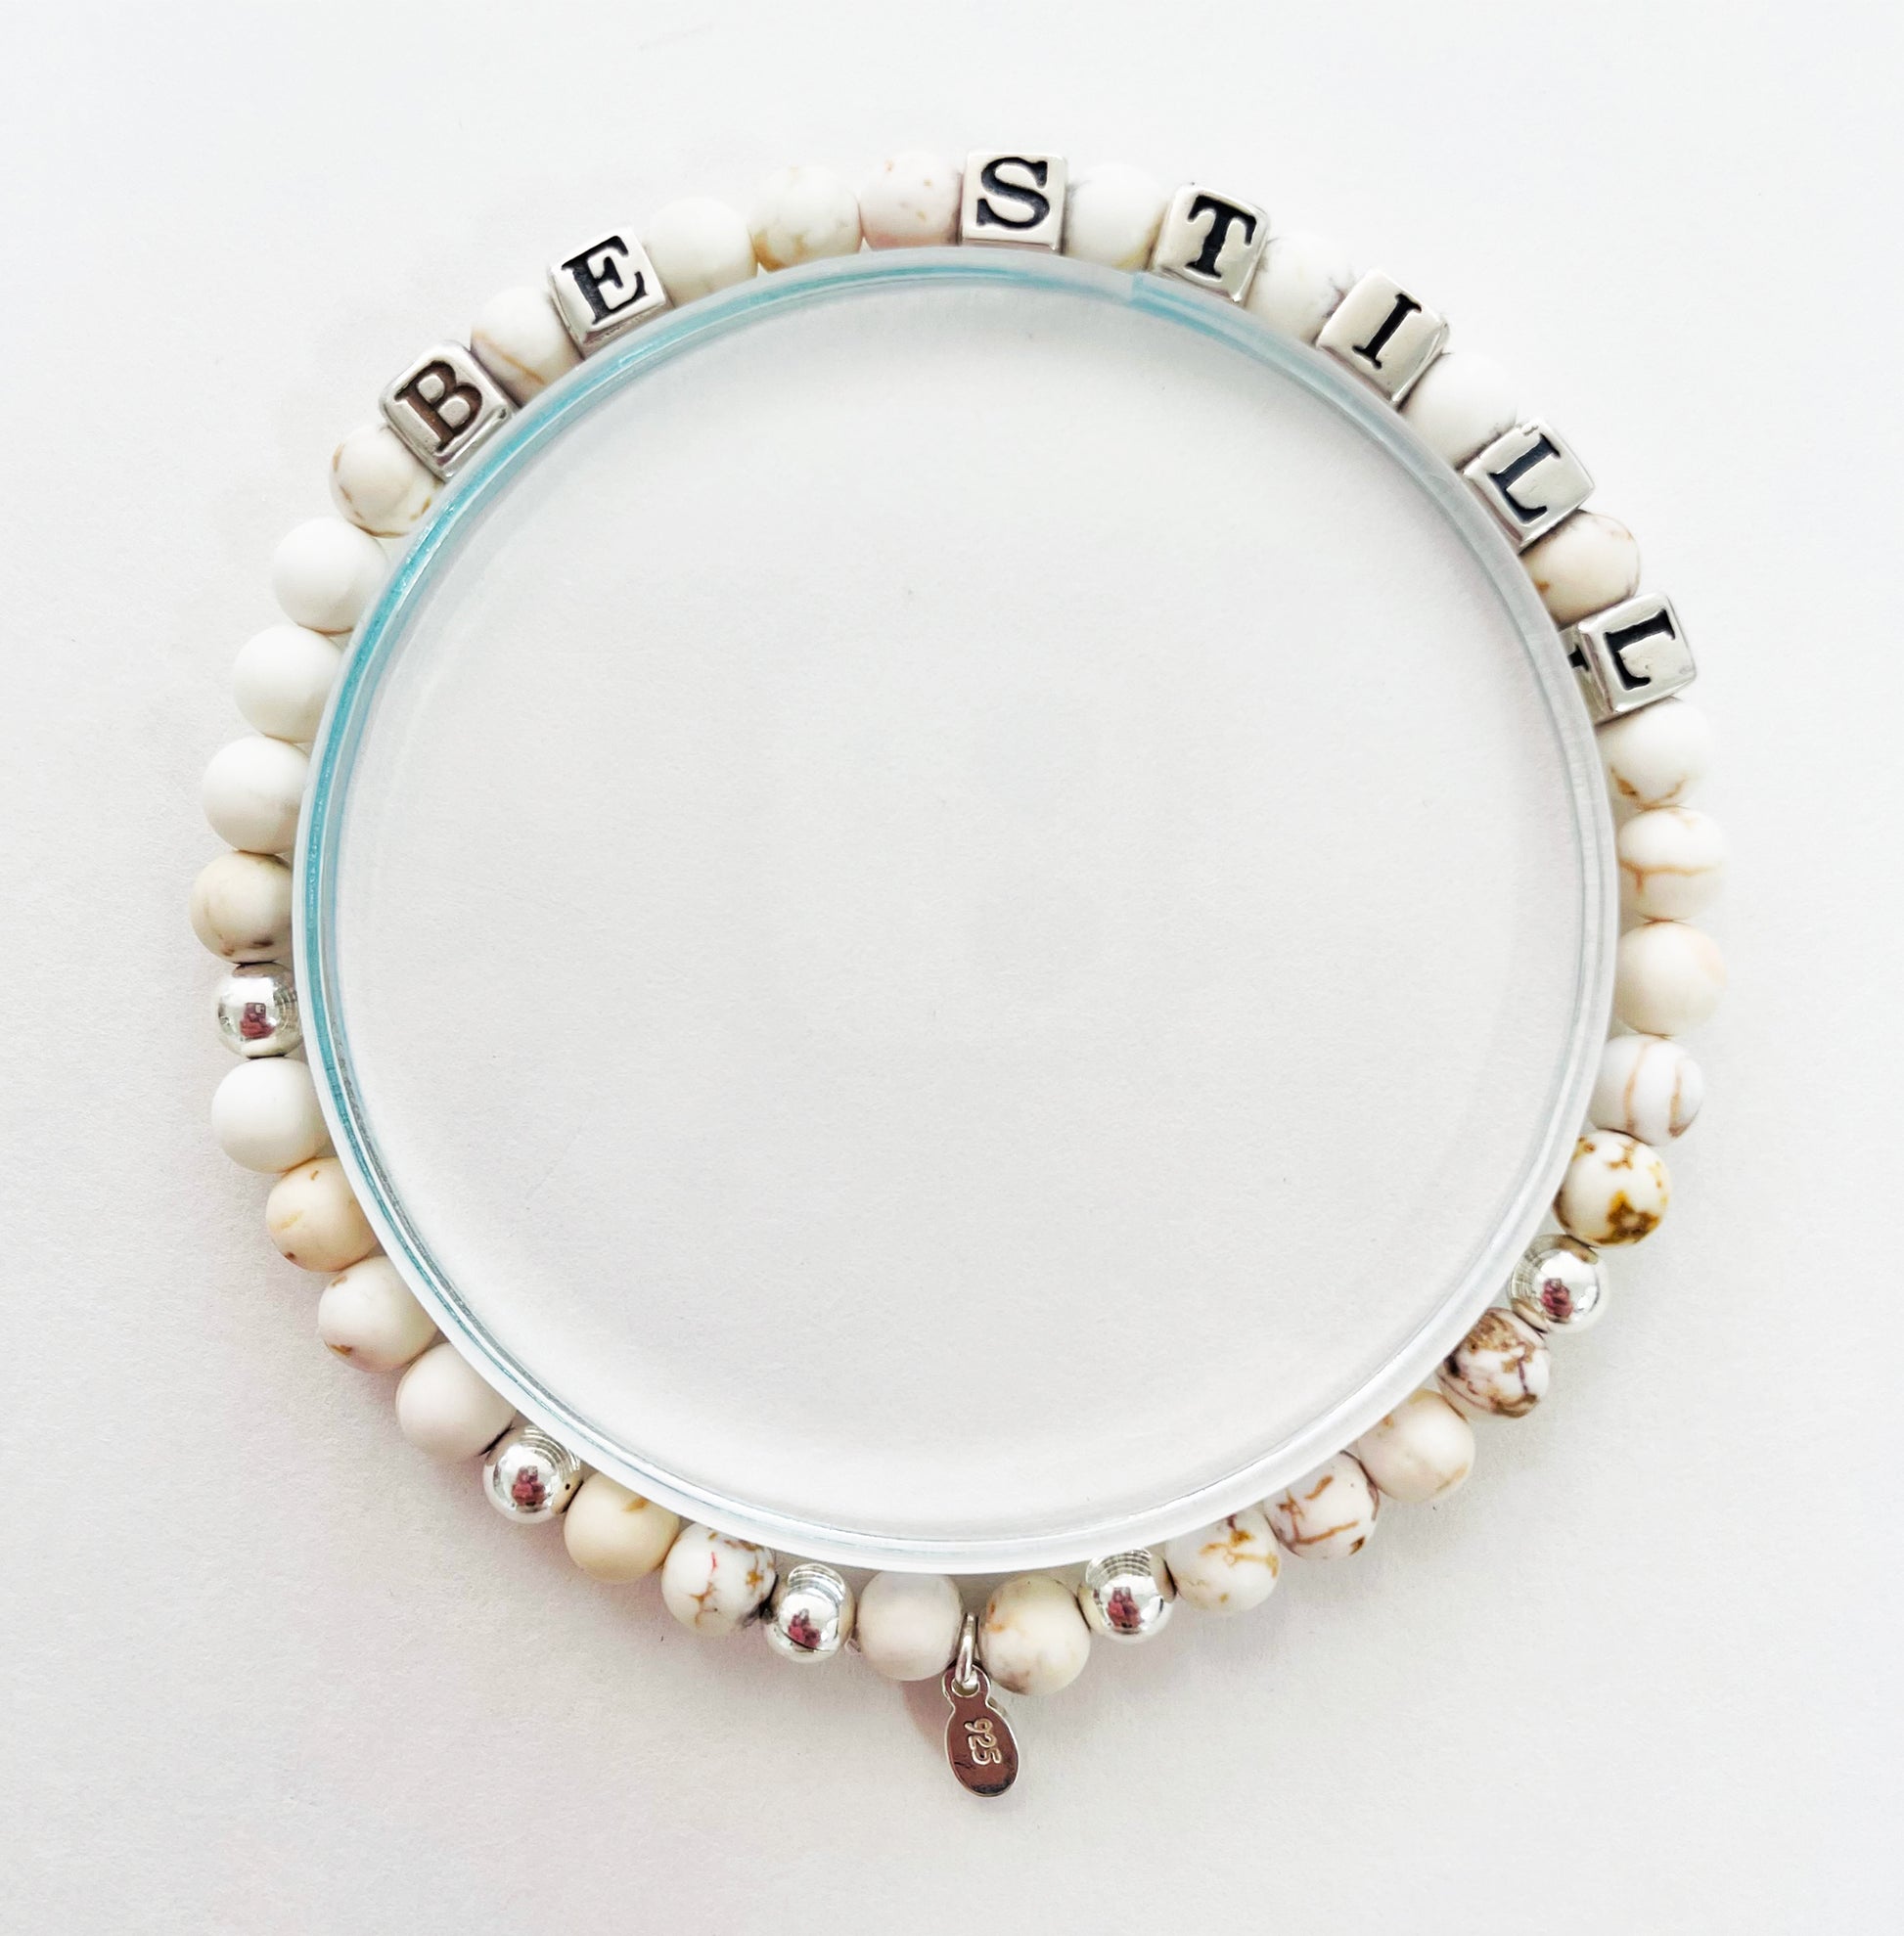 Be Still message bracelet in sterling silver and white hoplite beads, pairs with Peace bracelet well. Handmade high quality message bracelet